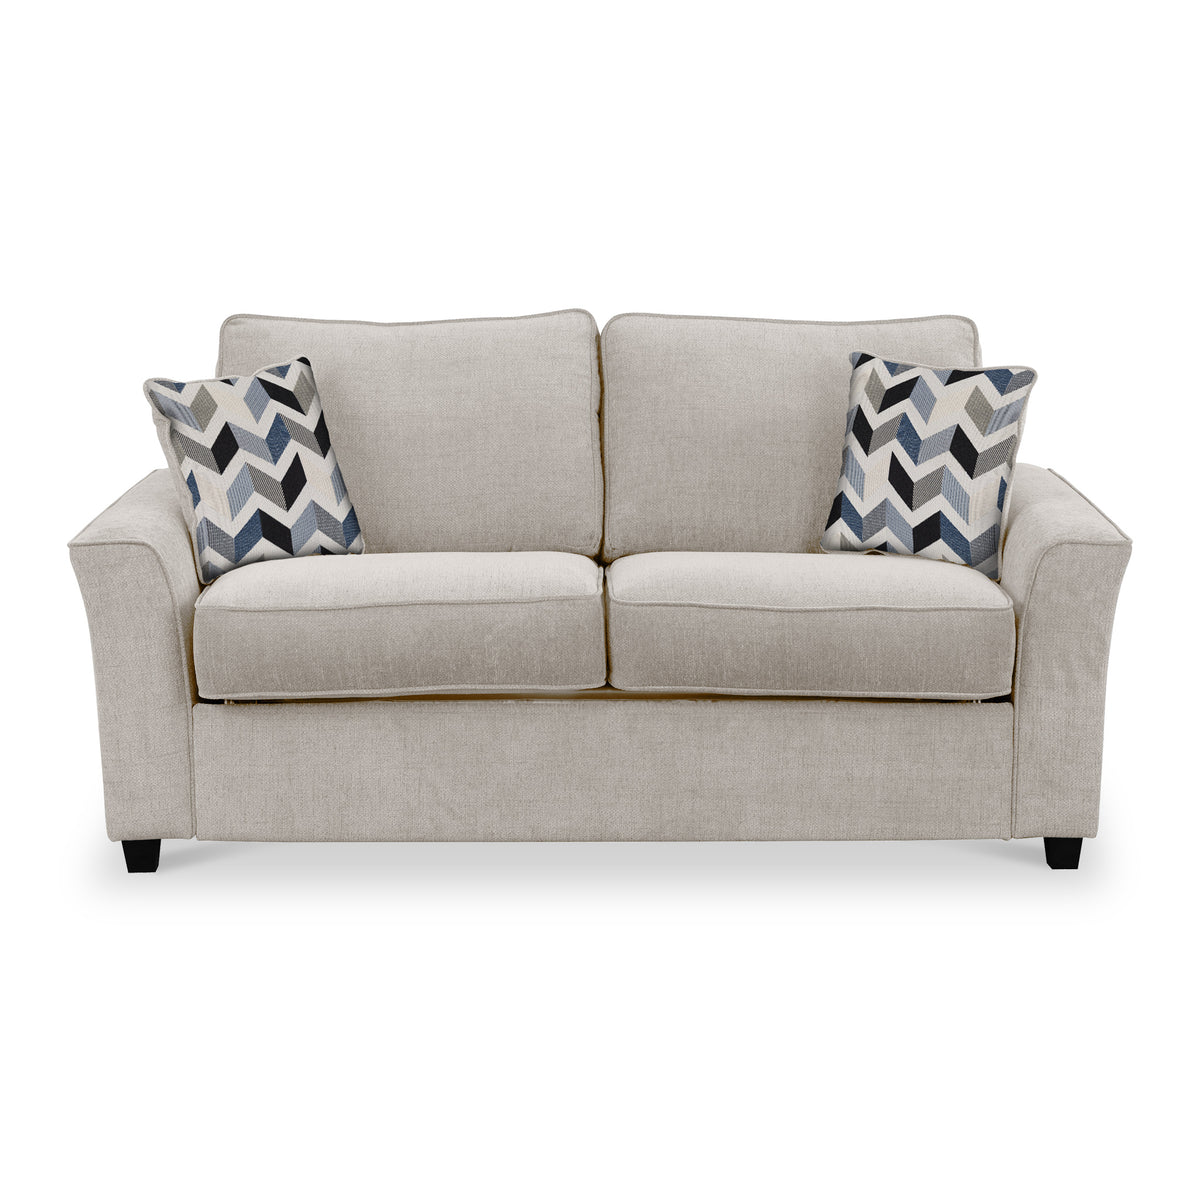 Boston 2 Seater Sofabed in Oatmeal with Morelisa Denim Cushions by Roseland Furniture